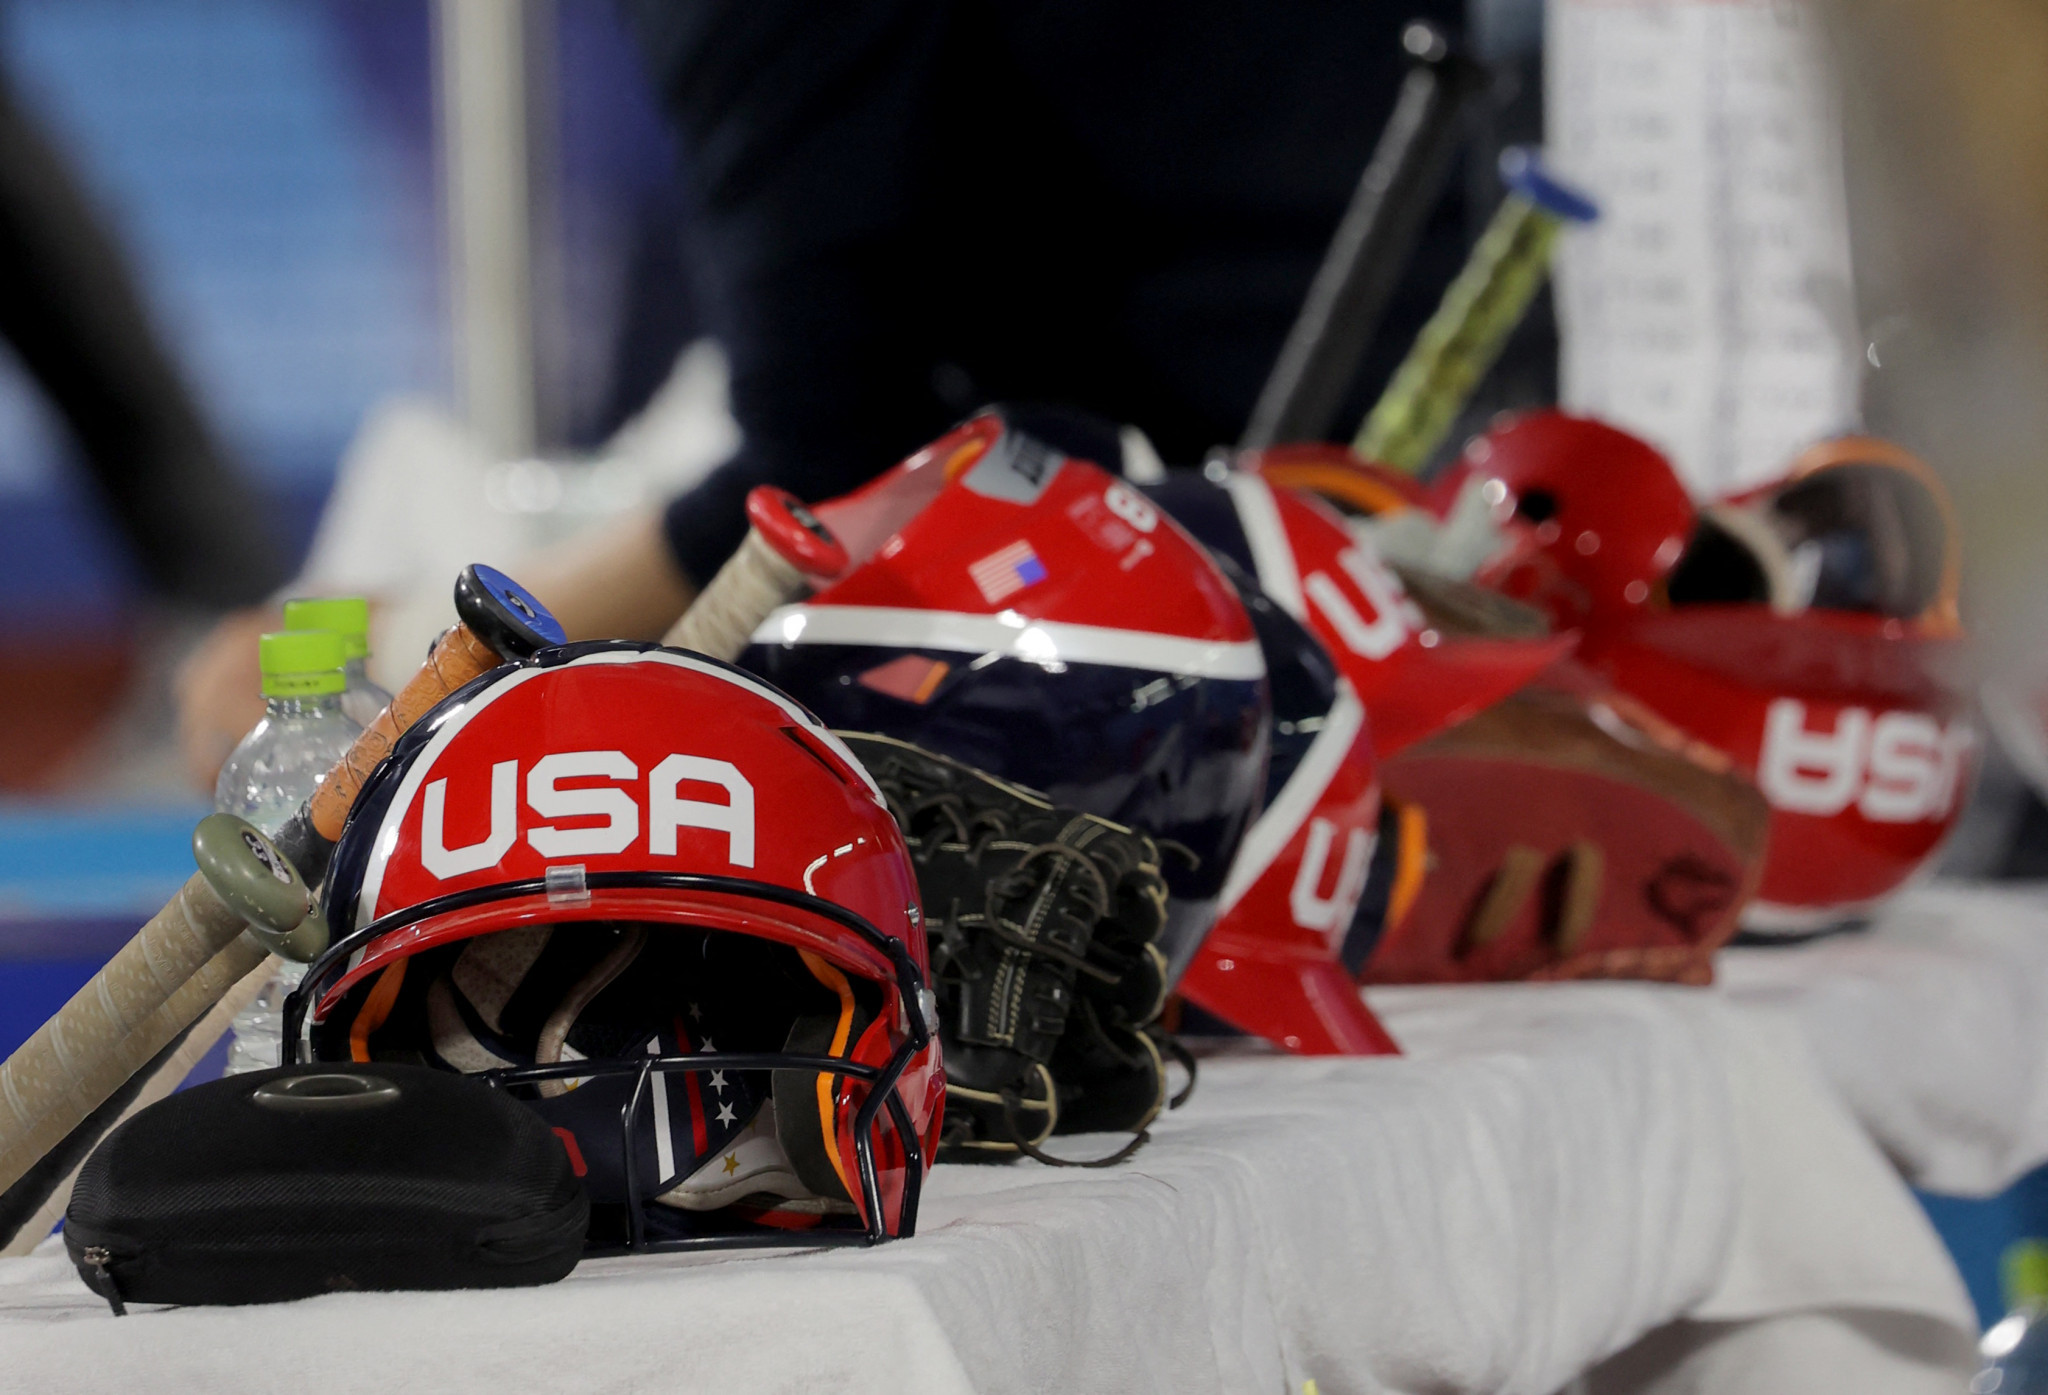 The latest agreement between USA Softball and Wilson Sporting Goods is expected to last three years ©Getty Images